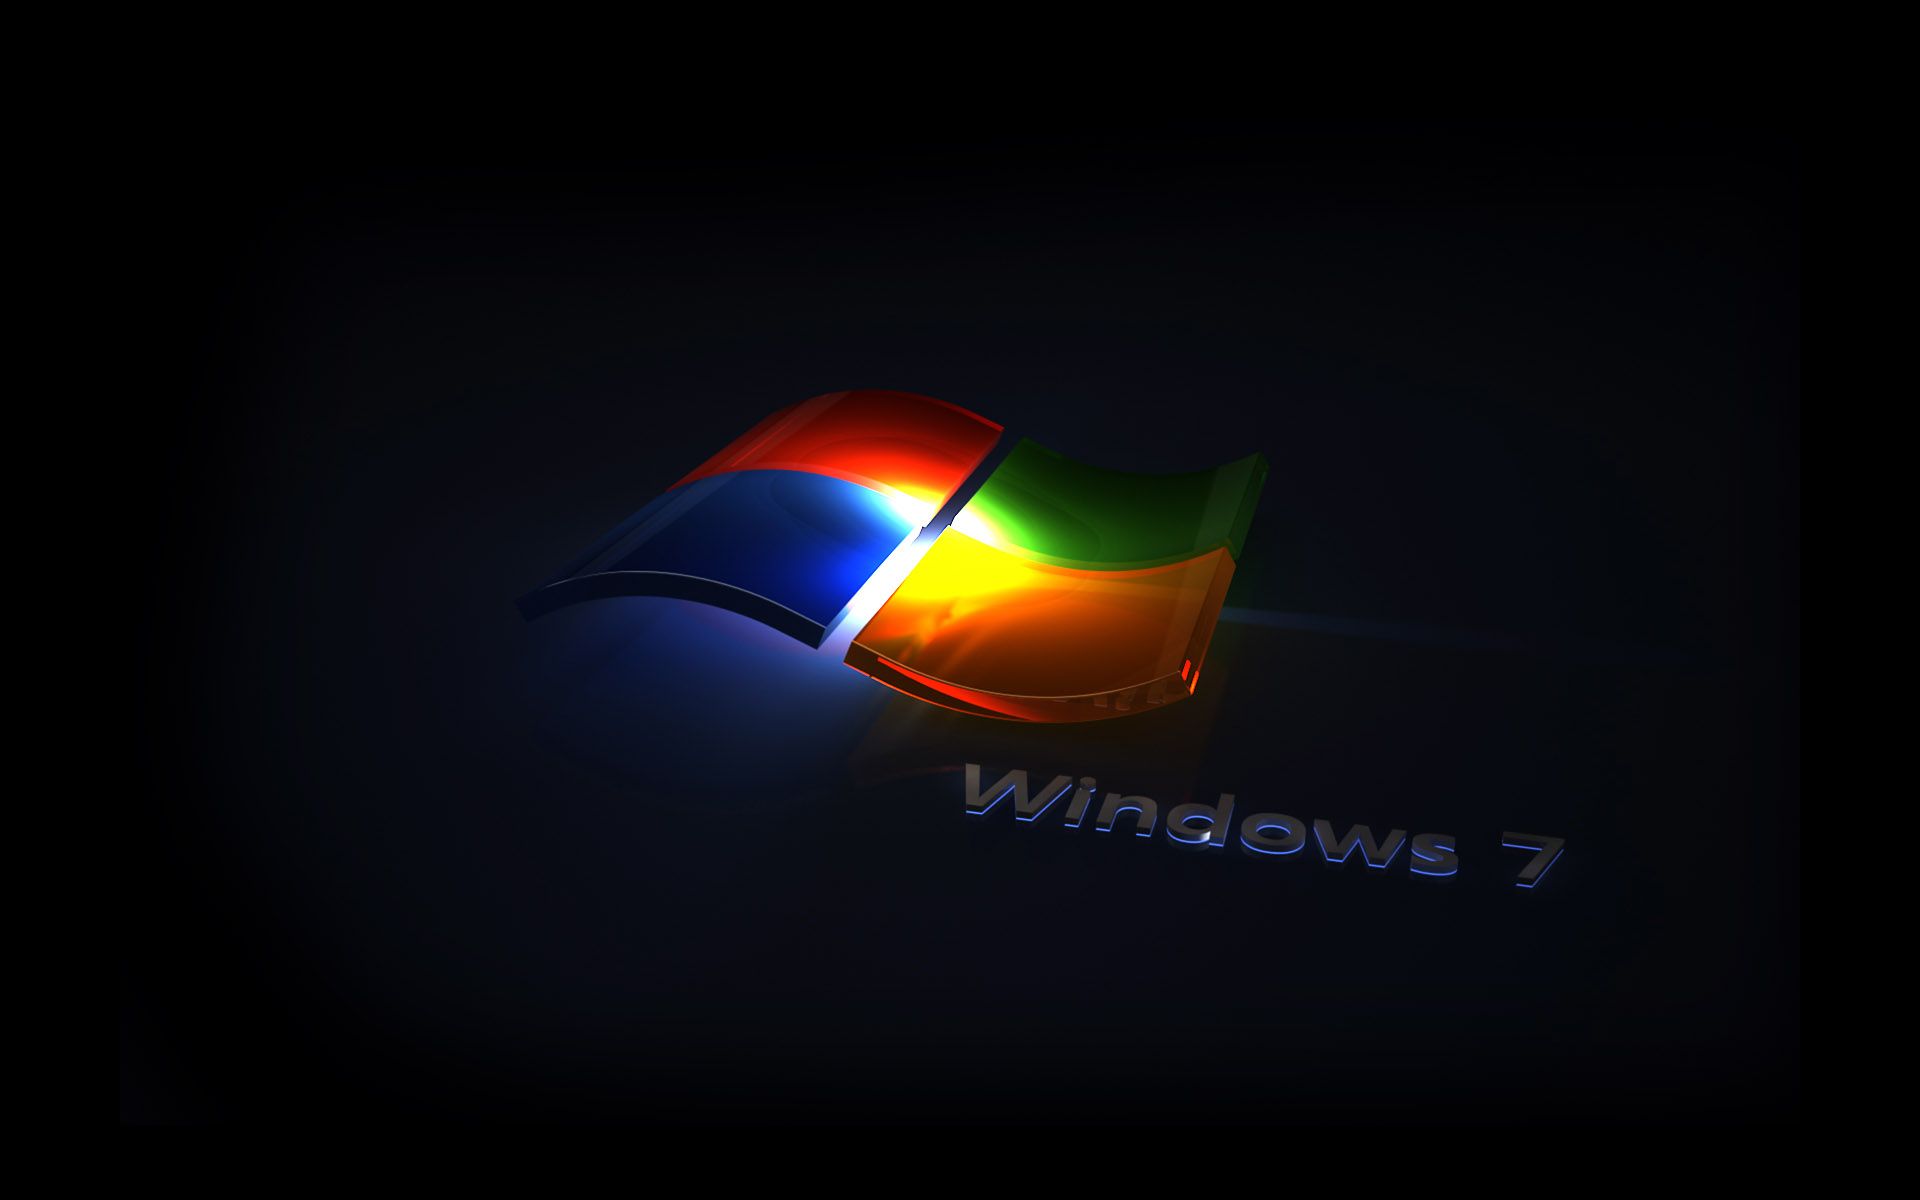 Windows 7 Ultimate HD Wallpaper - HD Images New